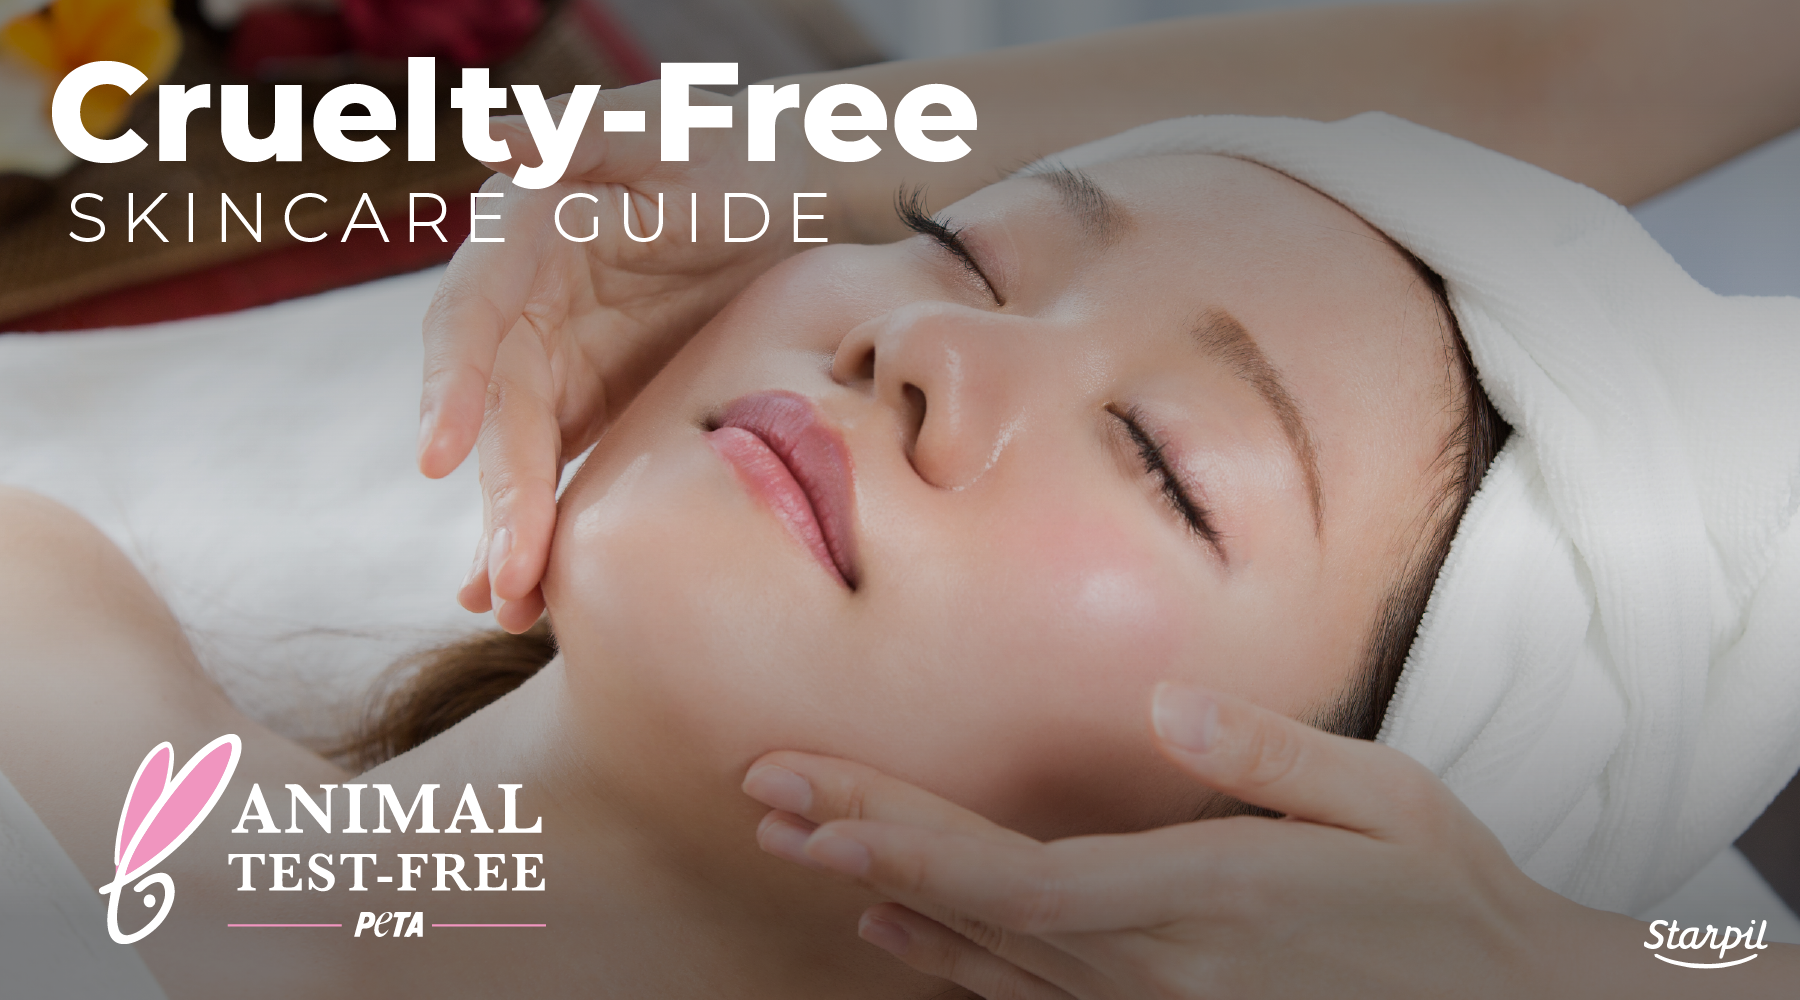 What to Know About Cruelty-Free Skincare